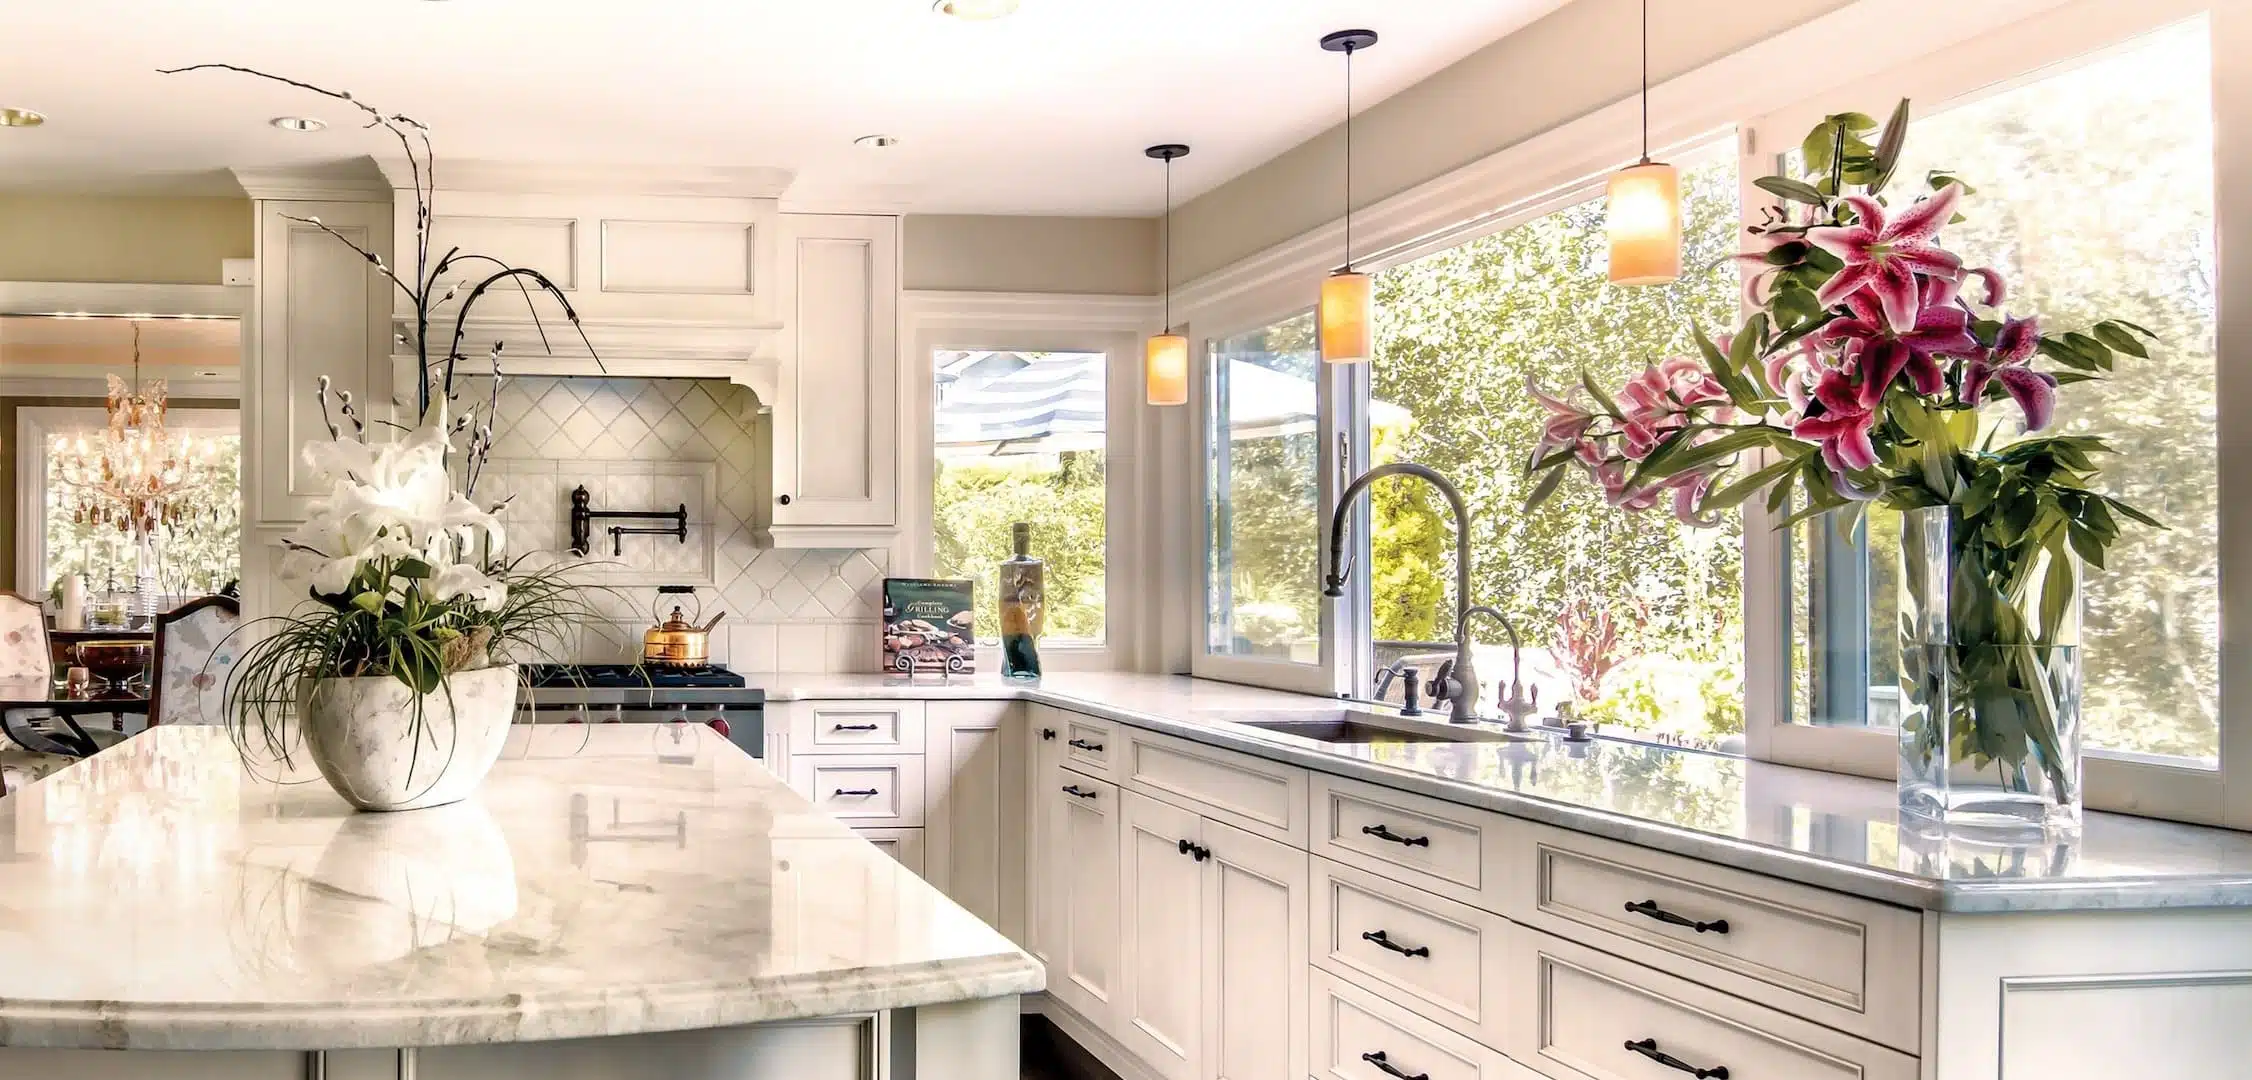 Kitchen Remodeling Inspiration for Your Next Project